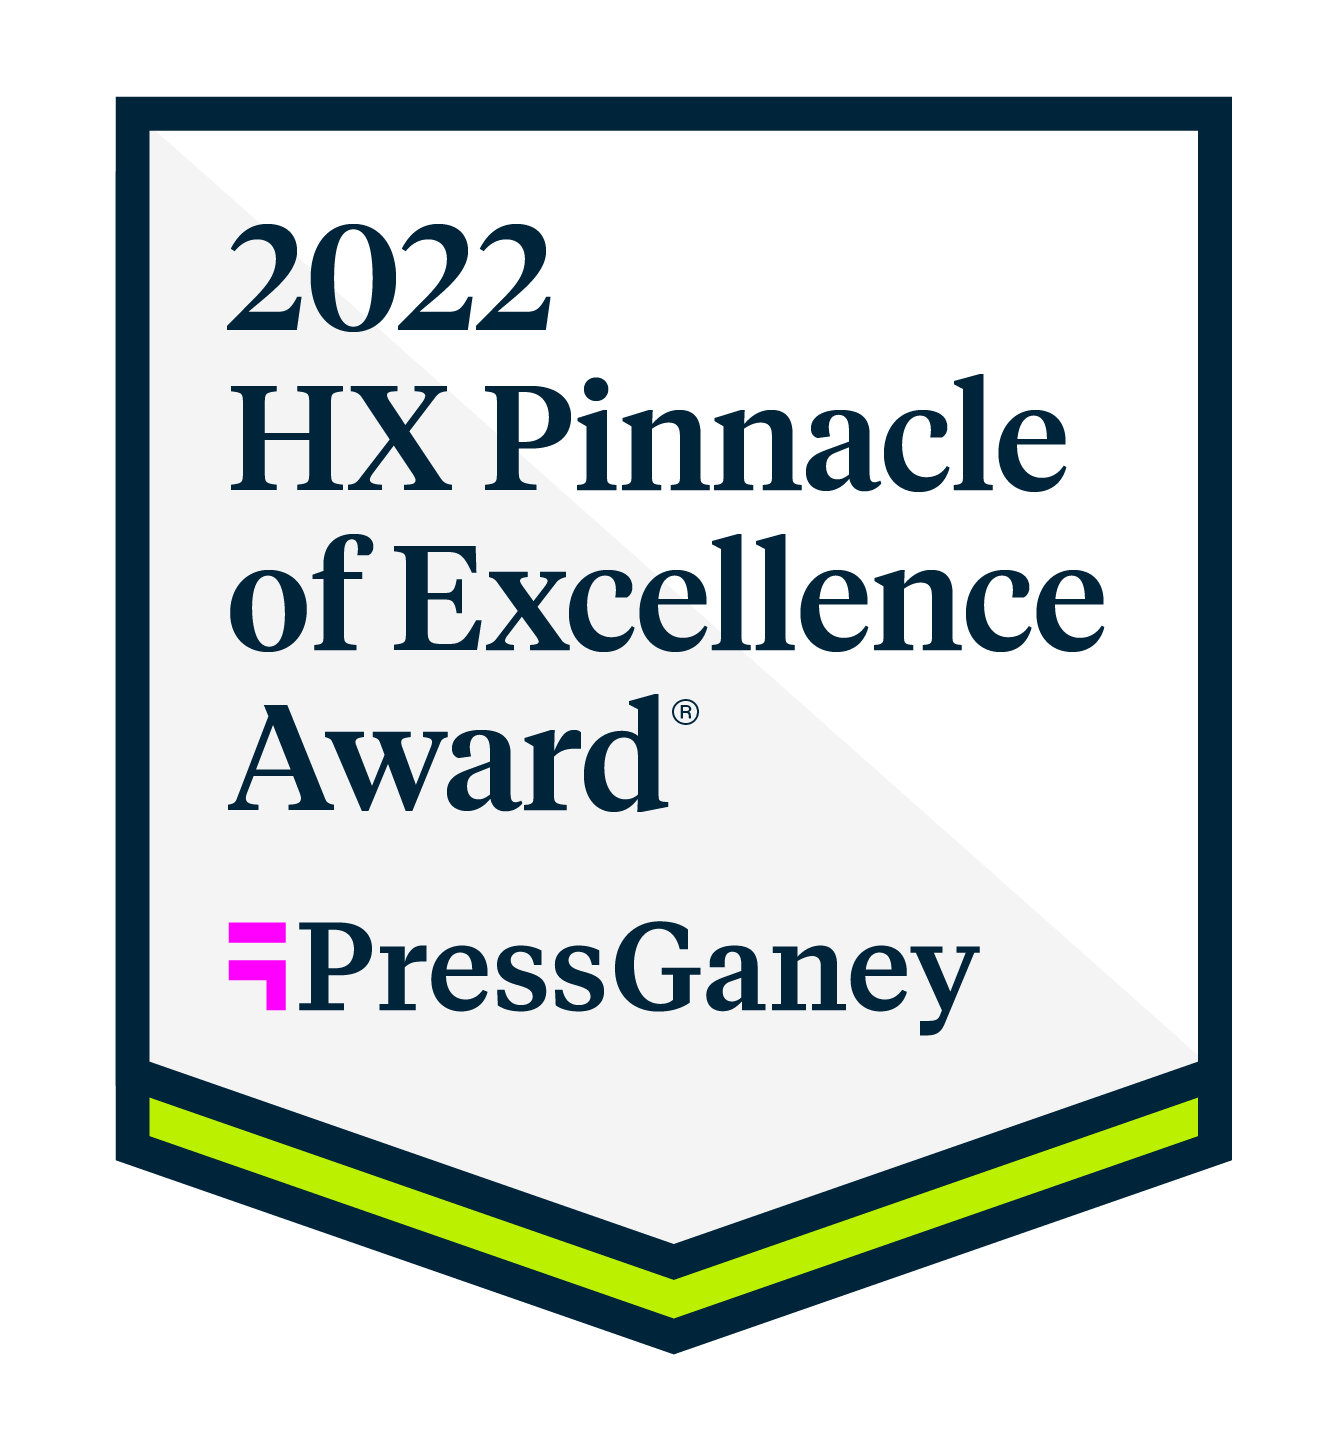 2022 Press Ganey Pinnacle of Excellence logo graphic